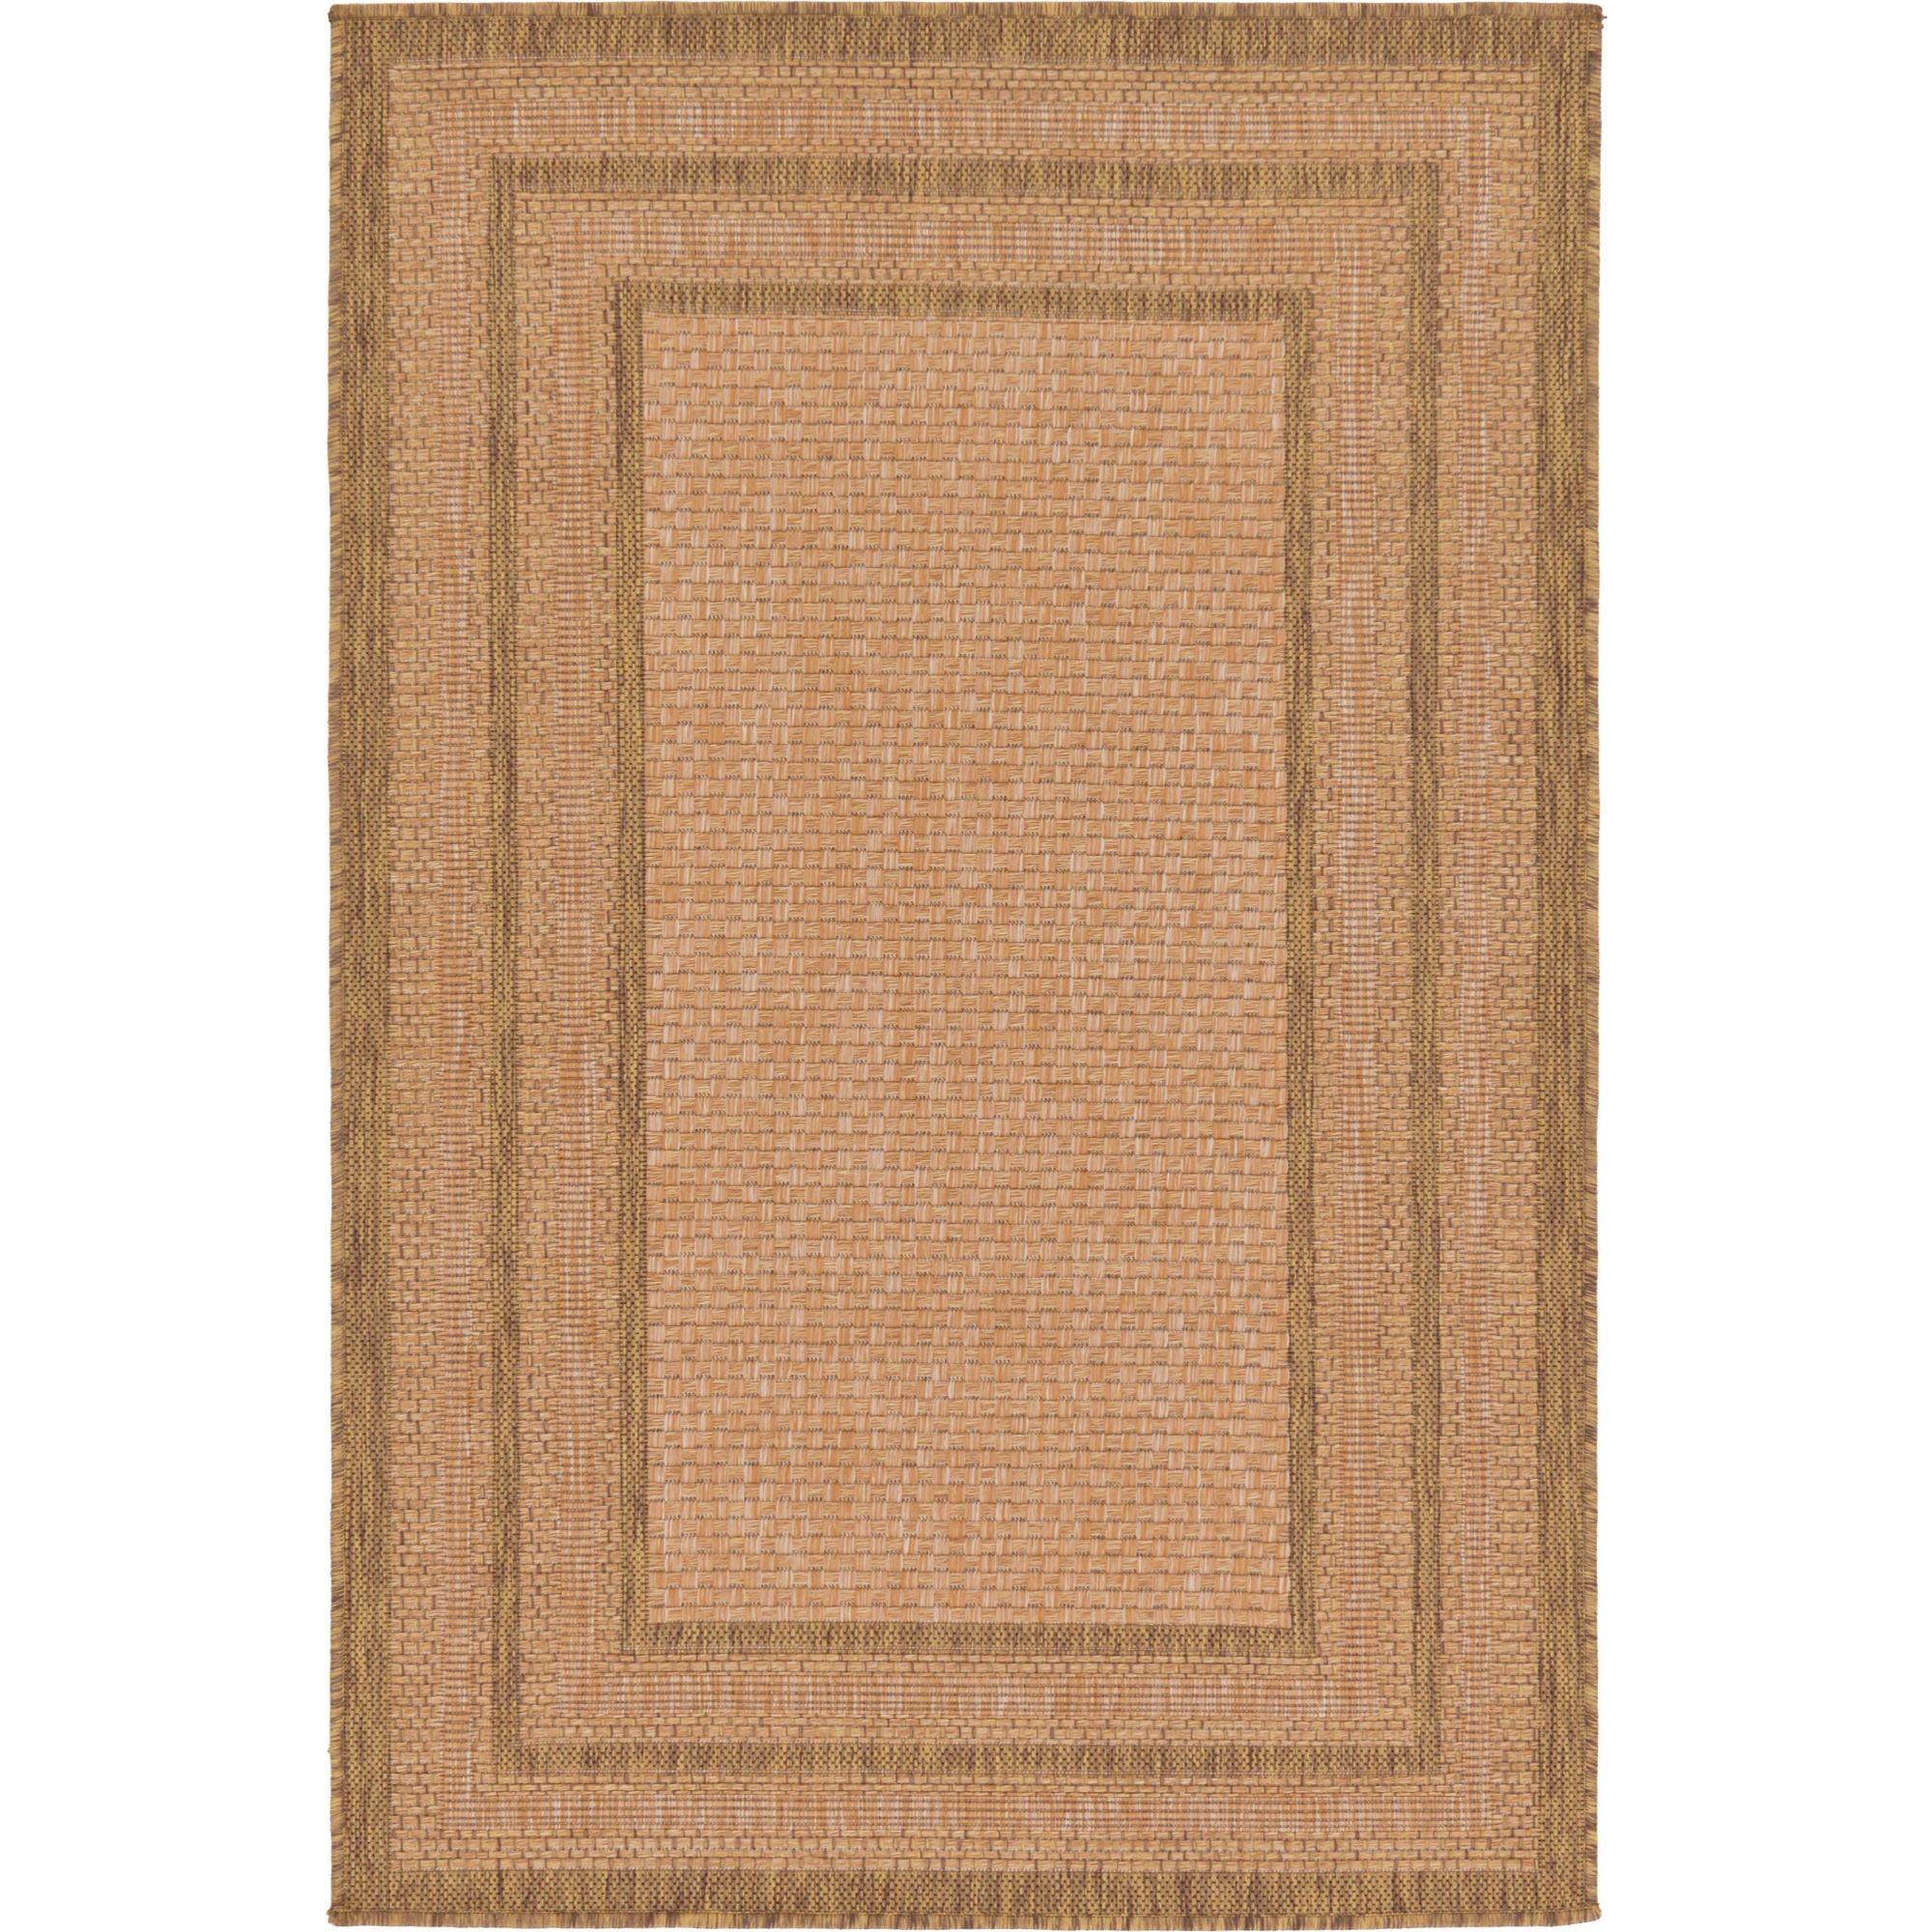 Elegant 5x8 ft Multi & Light Brown Synthetic Outdoor Rug